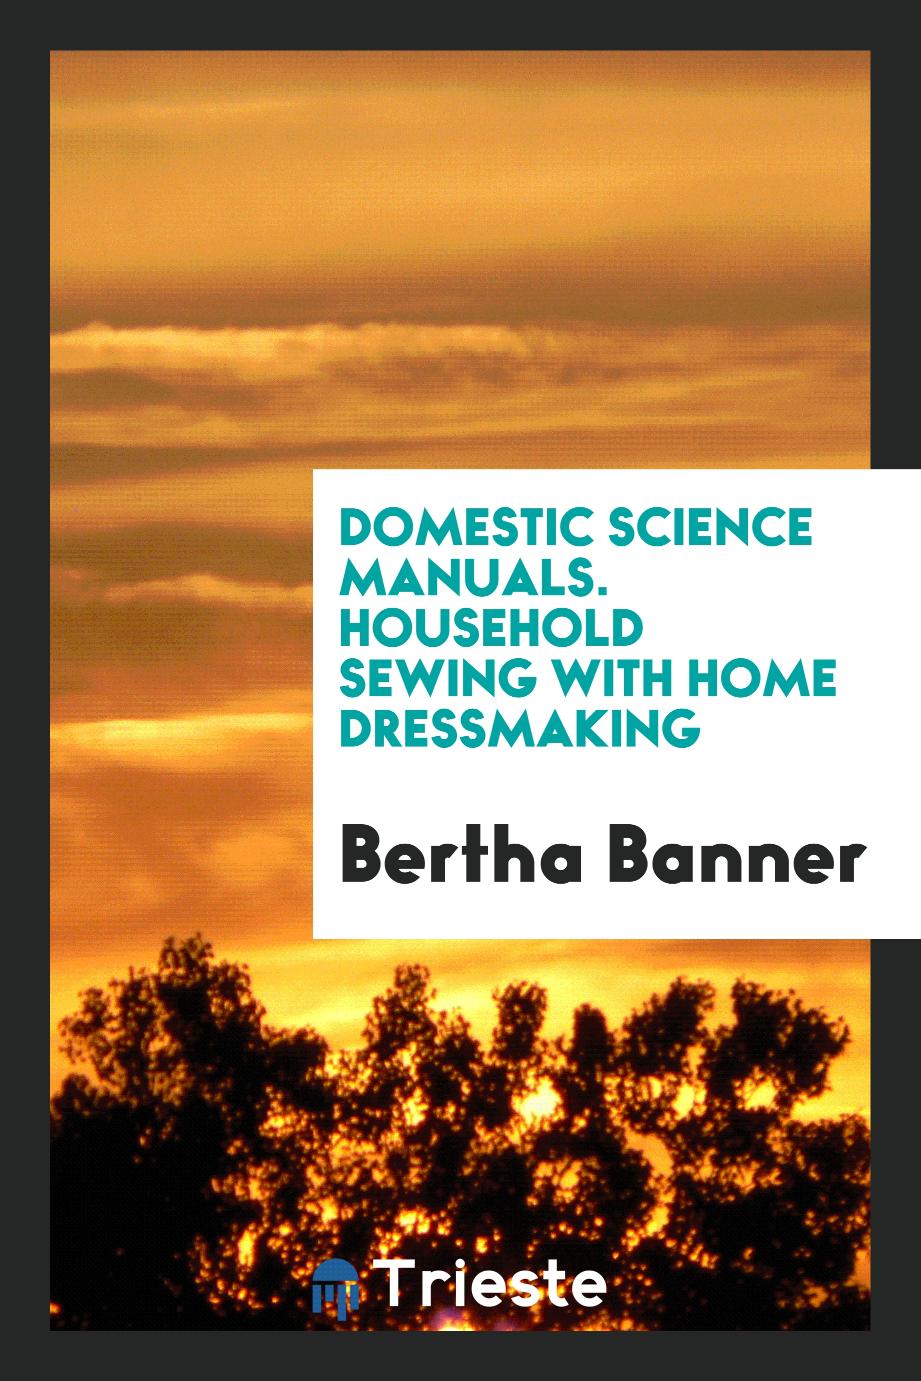 Domestic Science Manuals. Household Sewing with Home Dressmaking